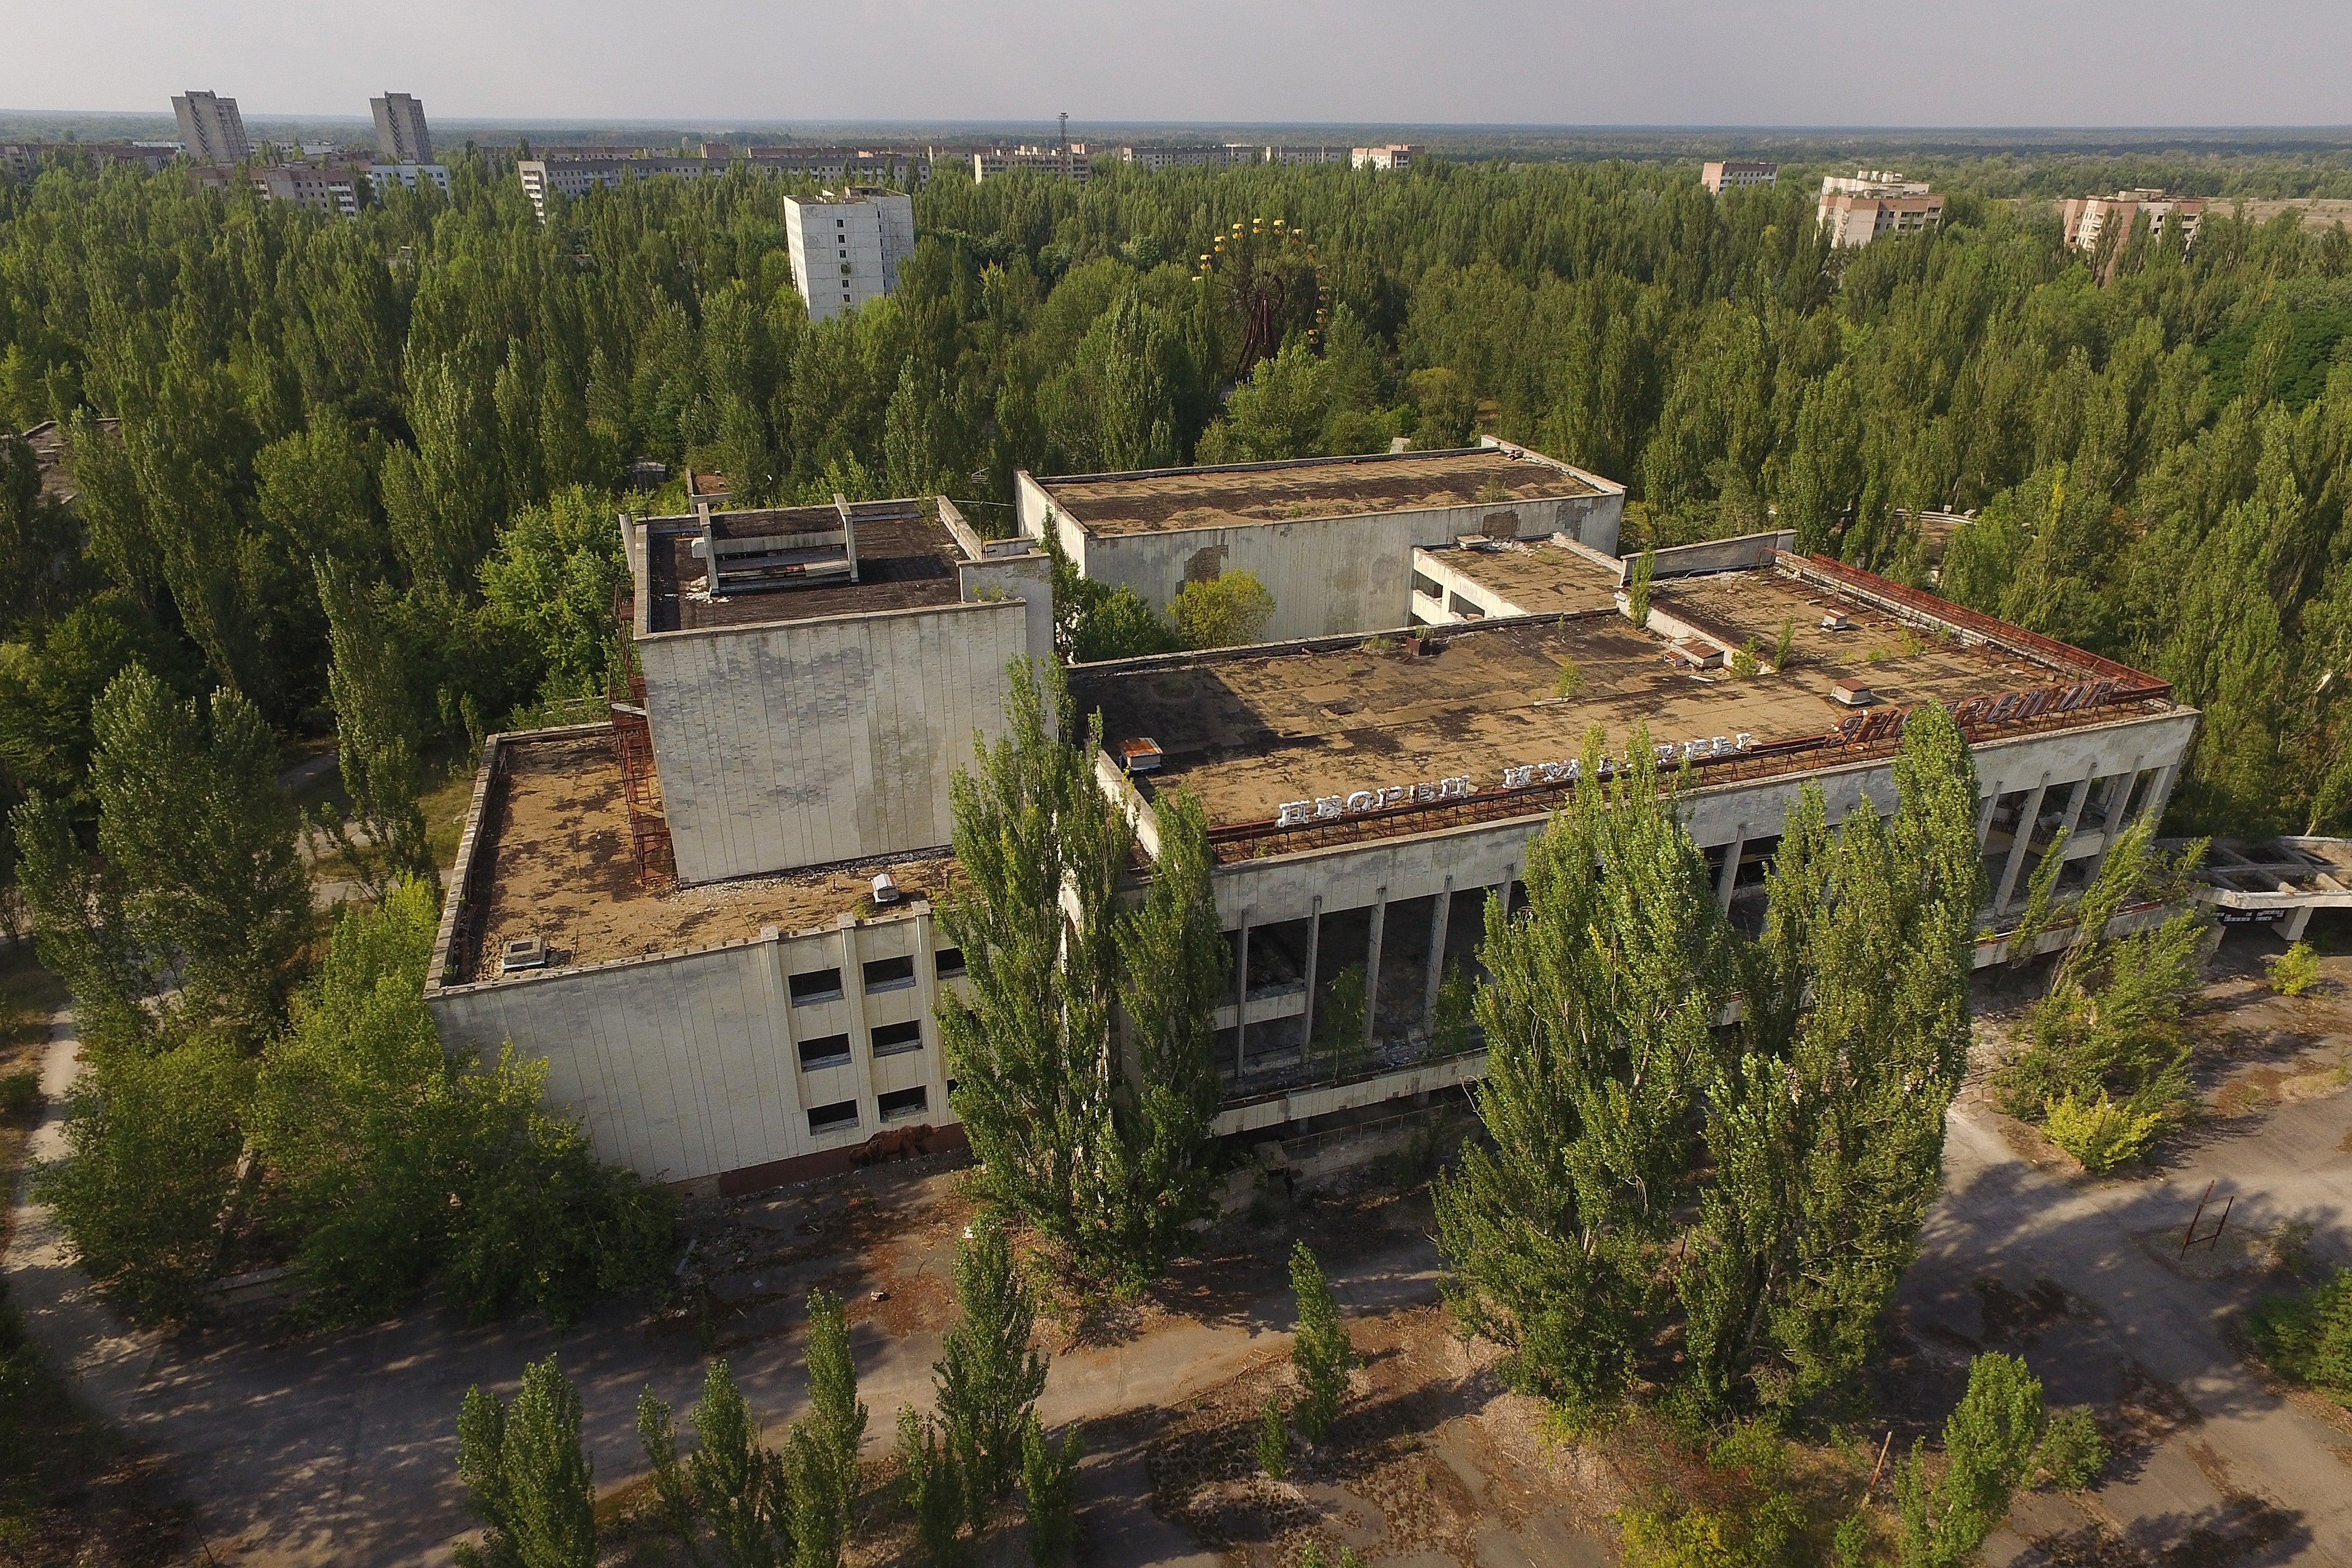 A former cultural centre in the abandoned city of Pripyat, near the Chernobyl nuclear power plant